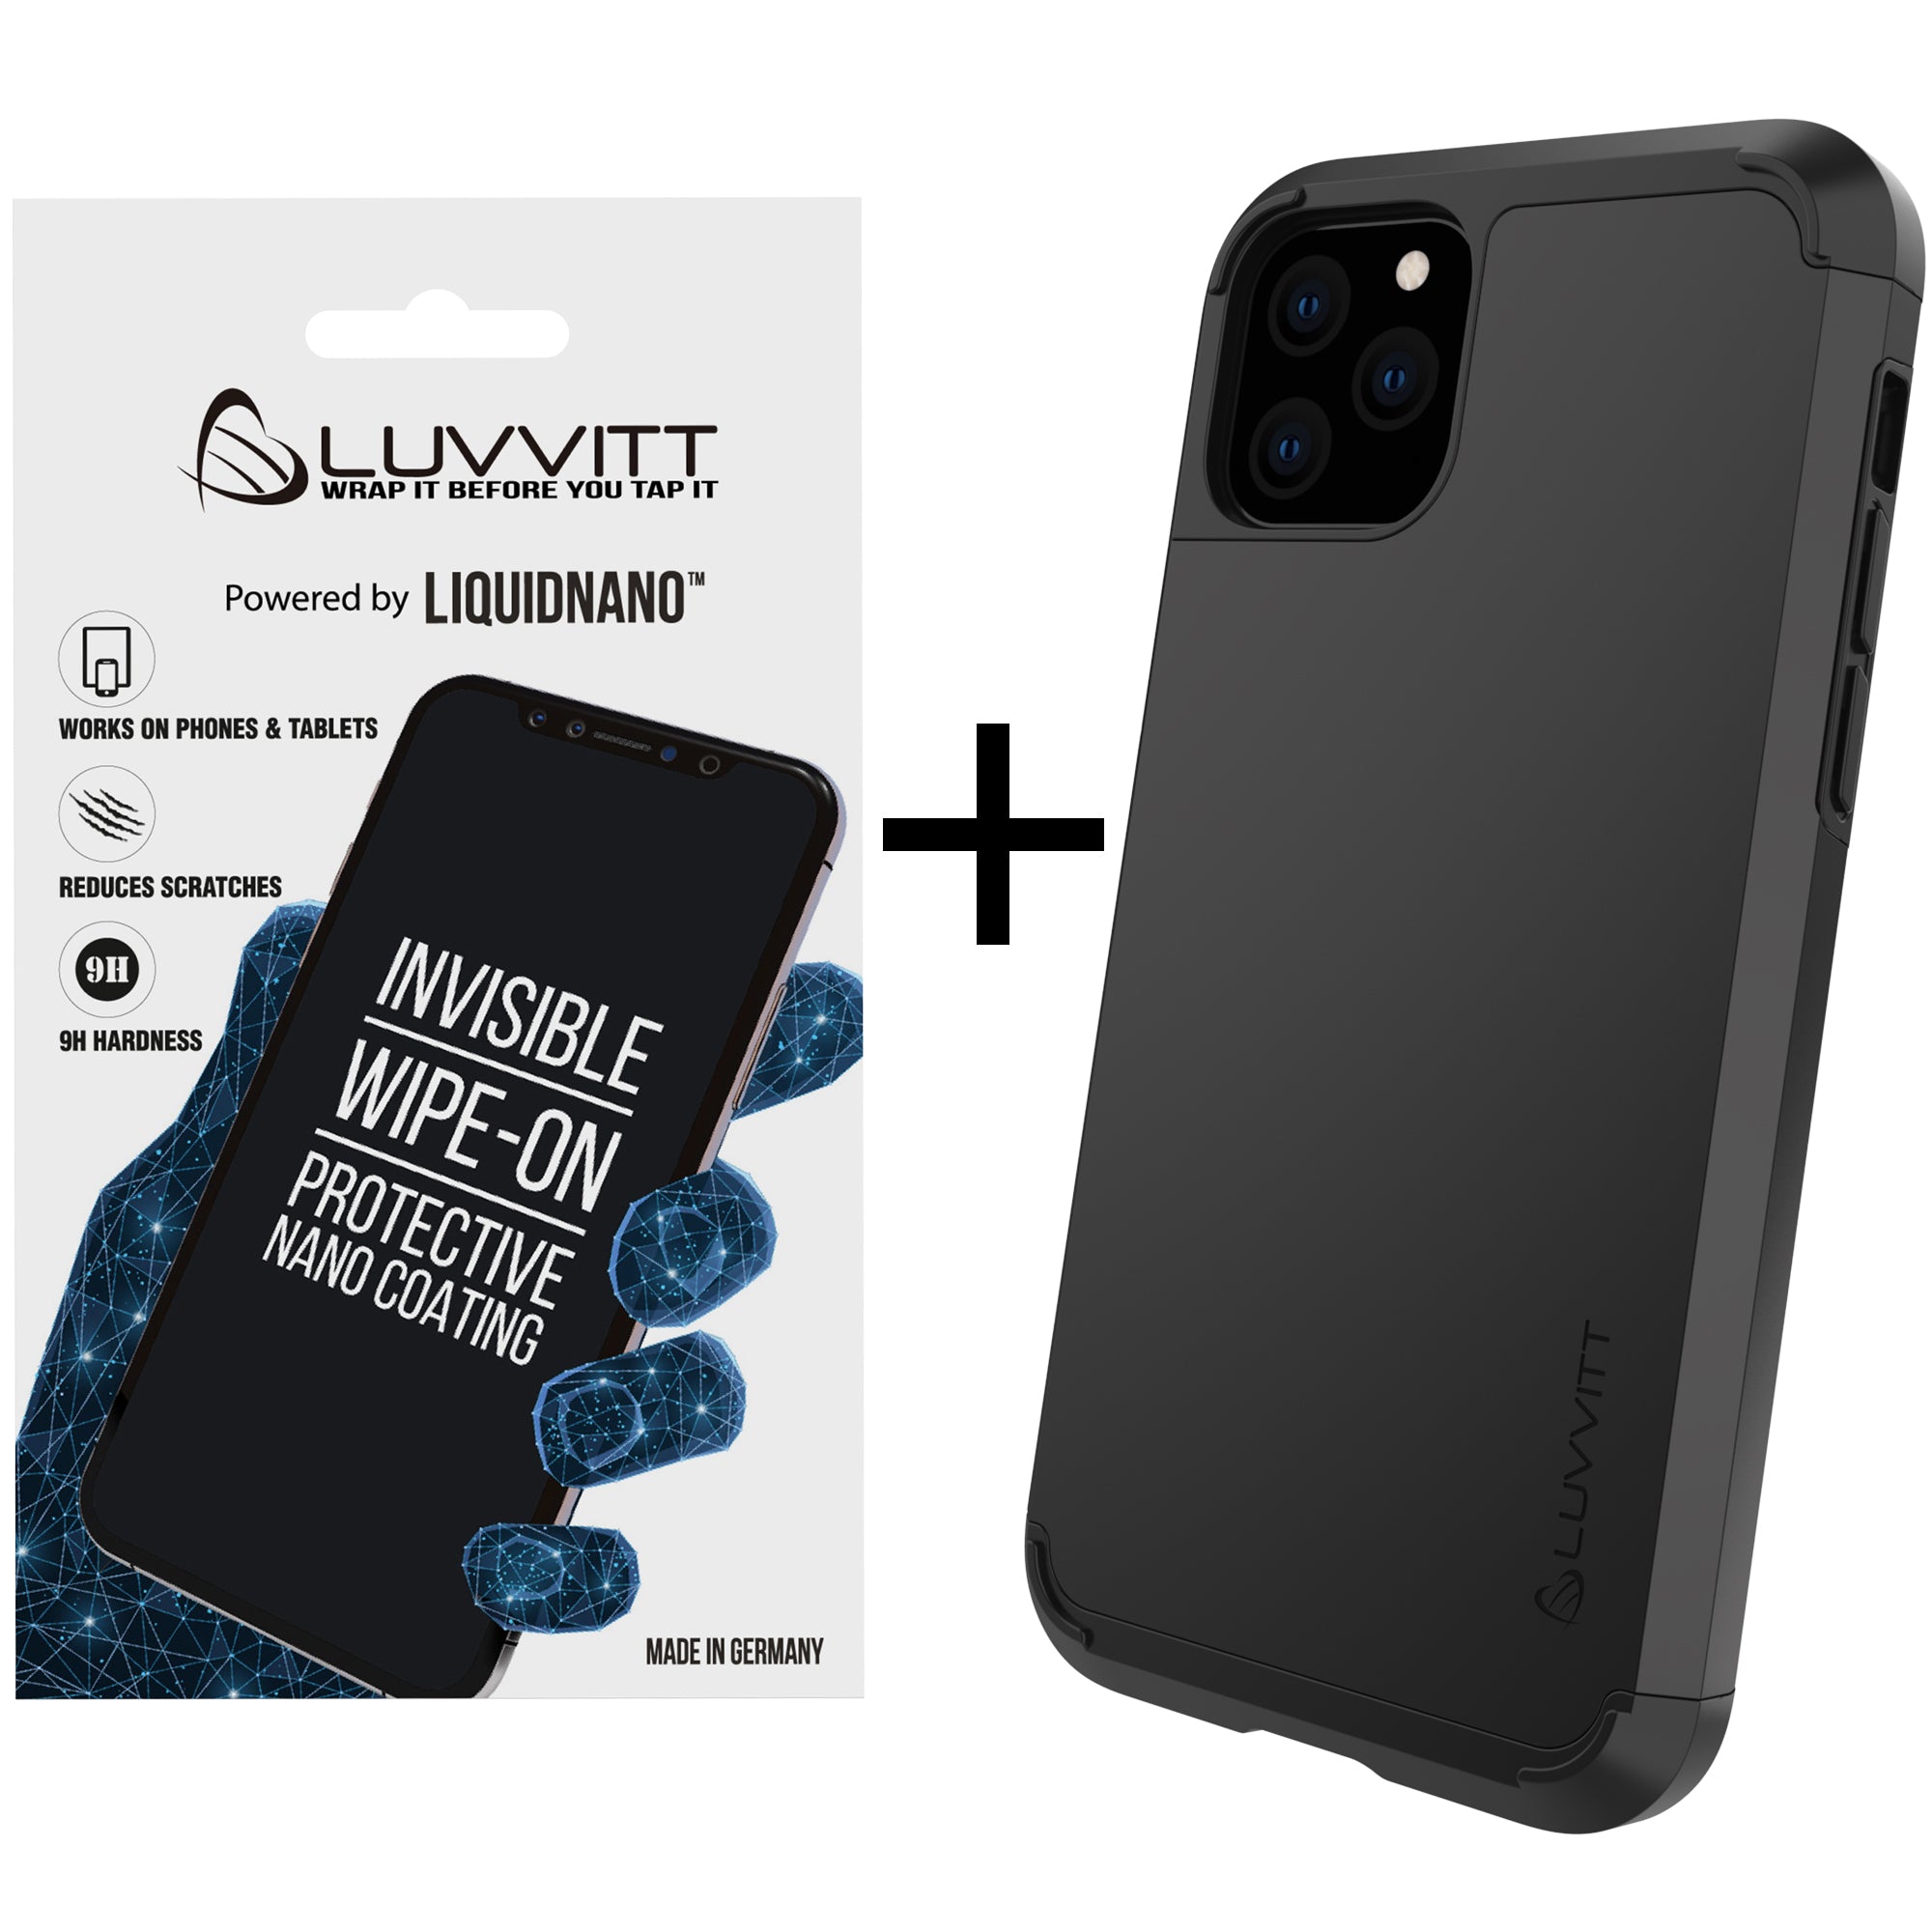 Luvvitt Ultra Armor Case and Liquid Glass Screen Protector Bundle for iPhone 11 Pro Max 2019 - Black